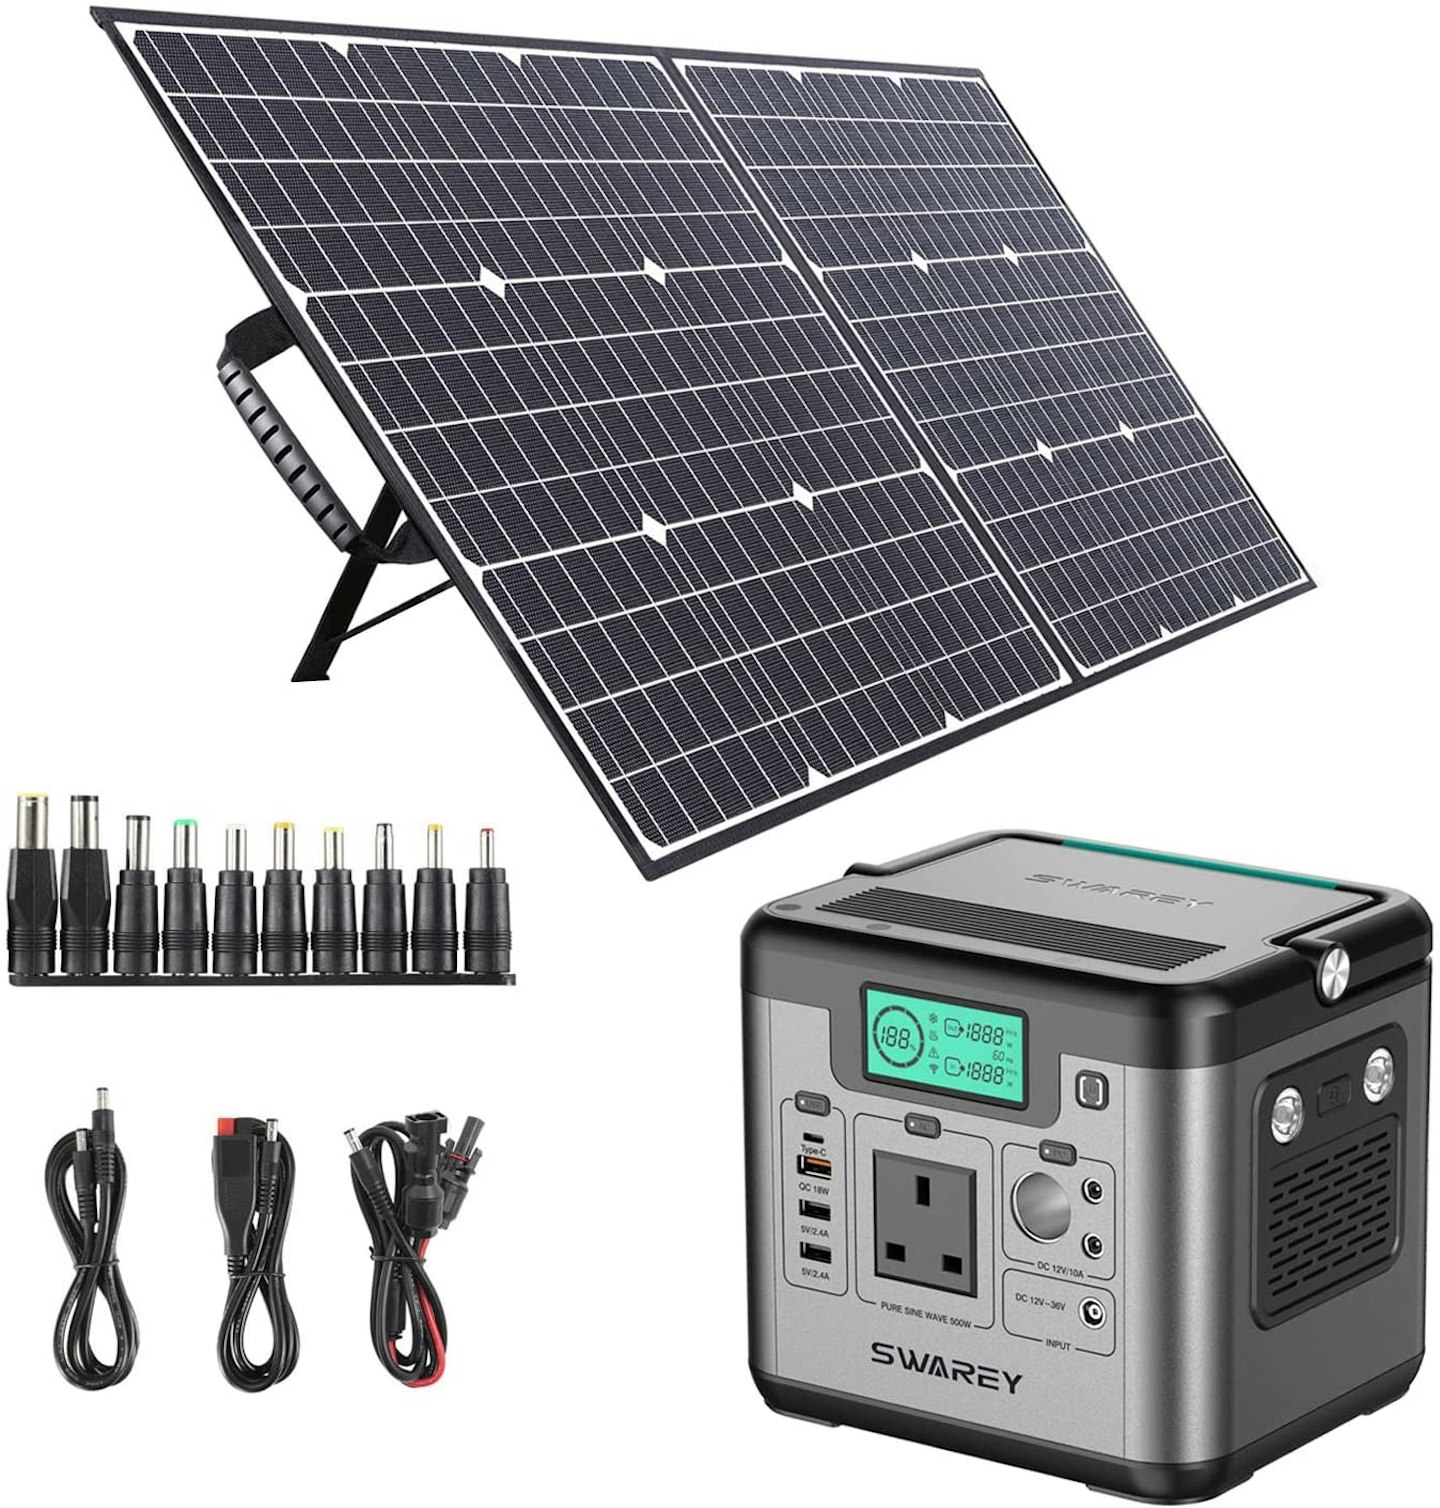 Swarey Portable Power Station 518Wh with 100W Foldable Solar Panel Solar Generator